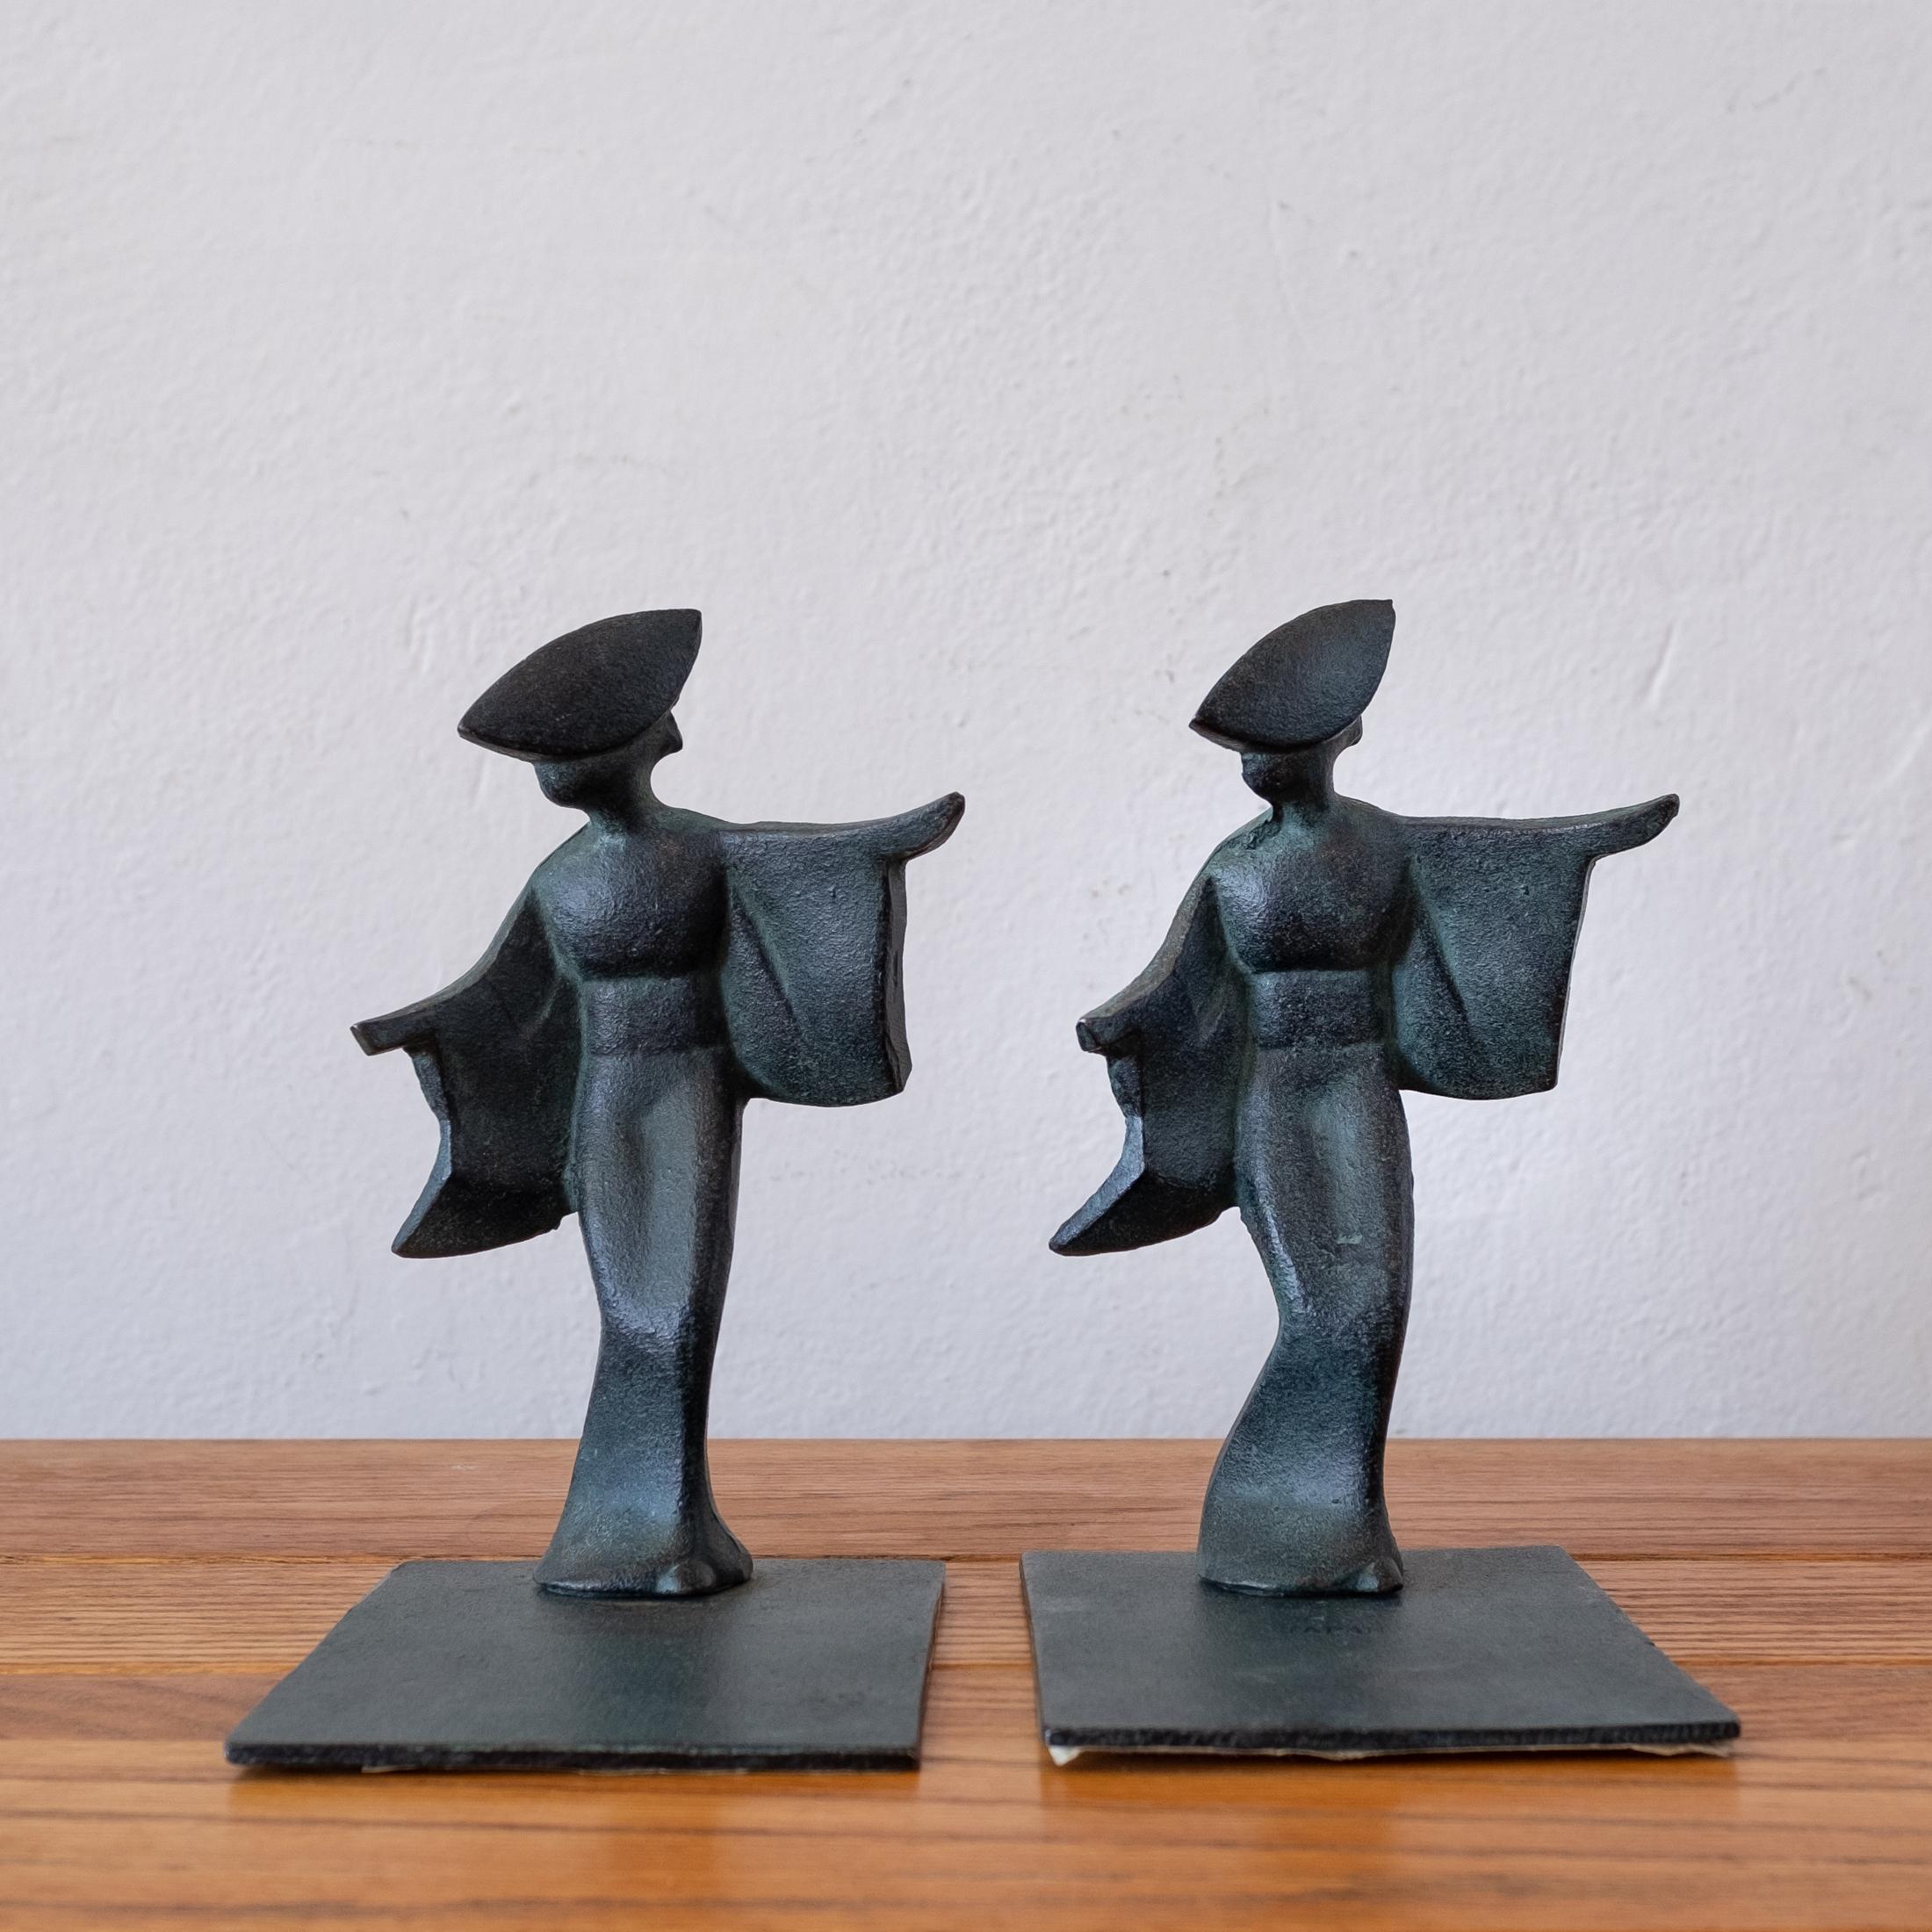 Japanese solid iron bookends from the 1950s. Marked Japan.